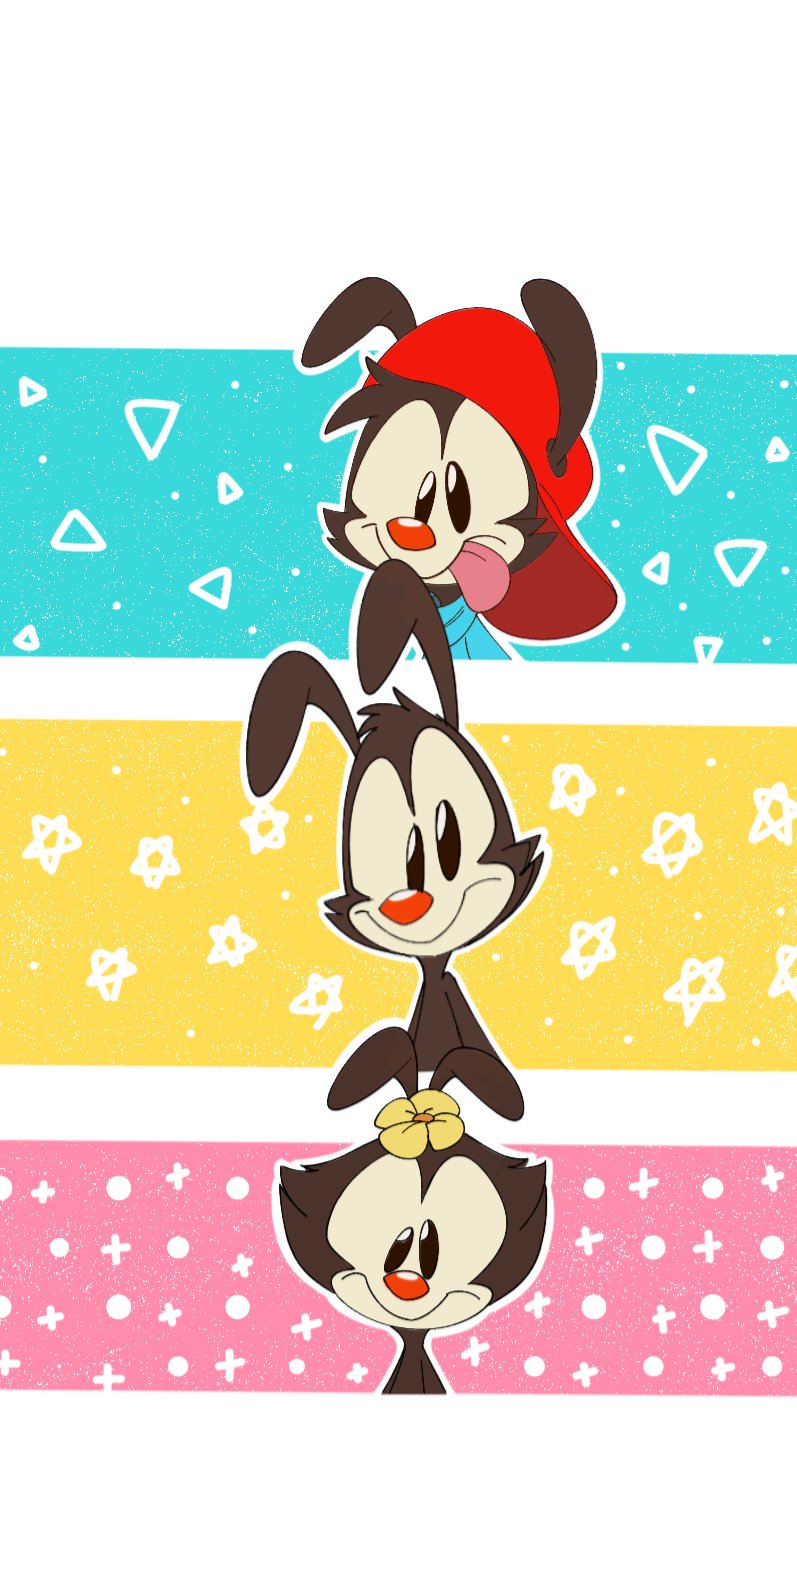 10 Animaniacs 2020 HD Wallpapers and Backgrounds